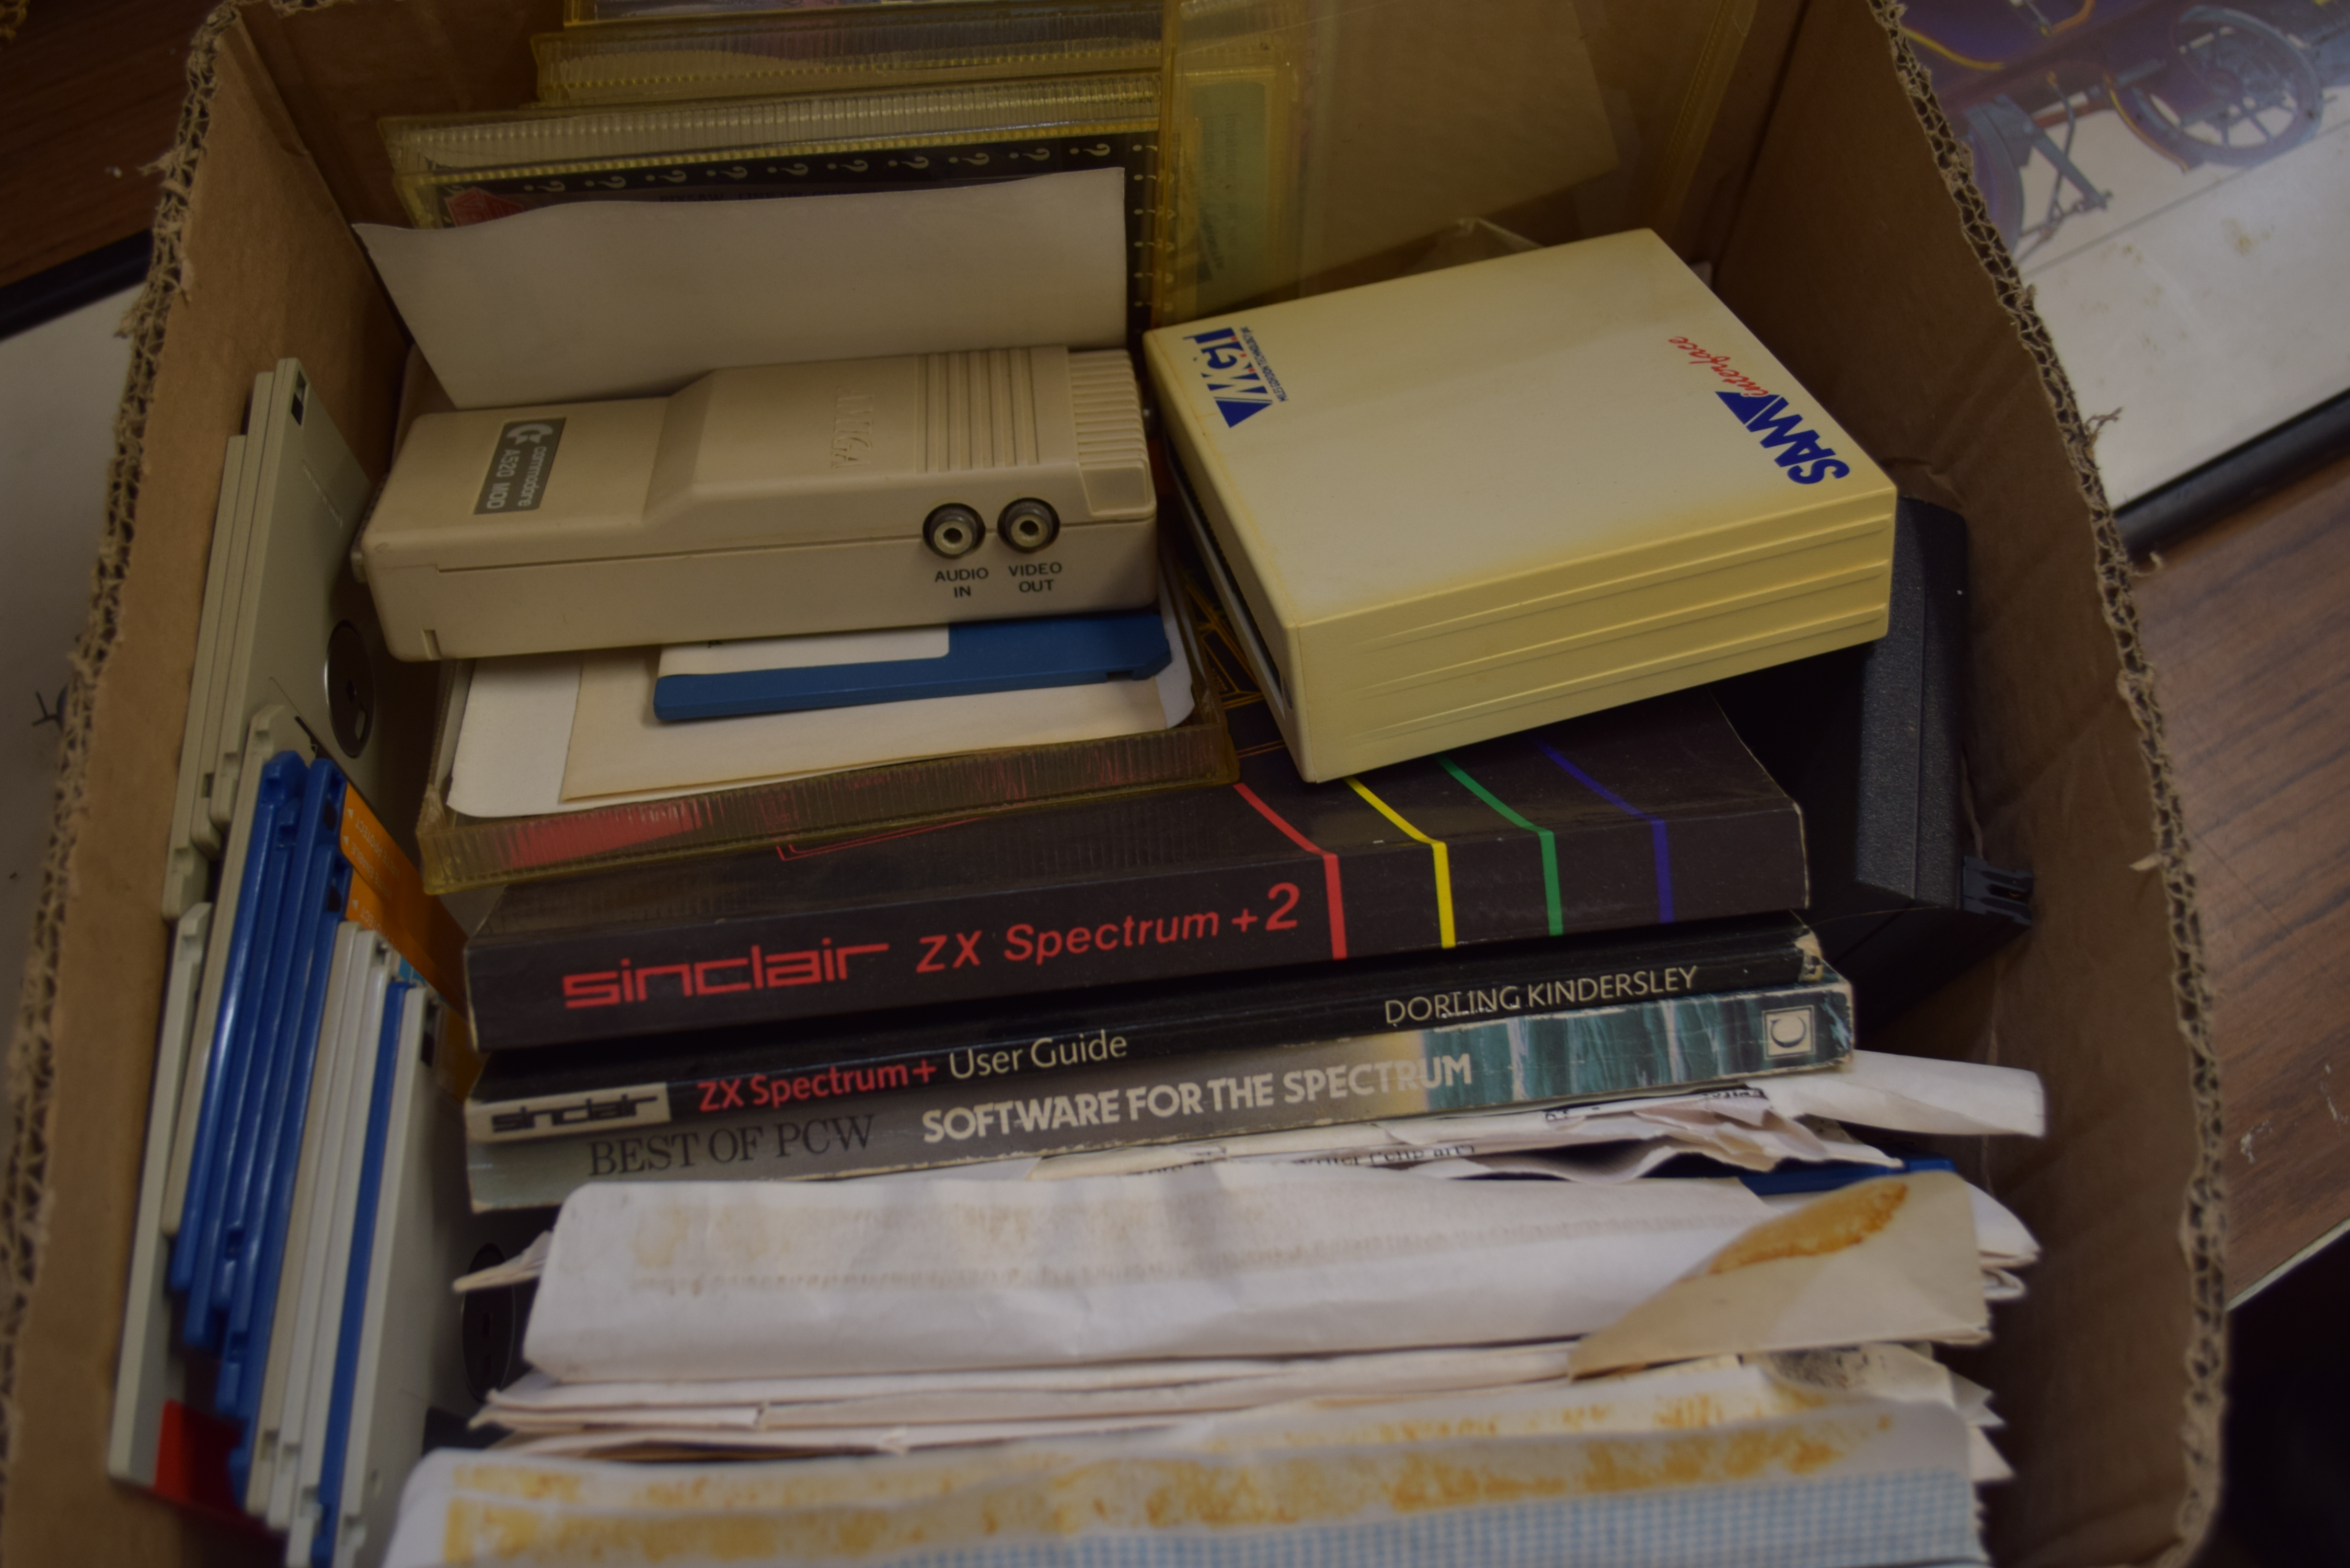 COMPUTING INTEREST: BOX CONTAINING SINCLAIR ZX SPECTRUM USER GUIDE, COMPUTER DISCS AND OTHER ITEMS